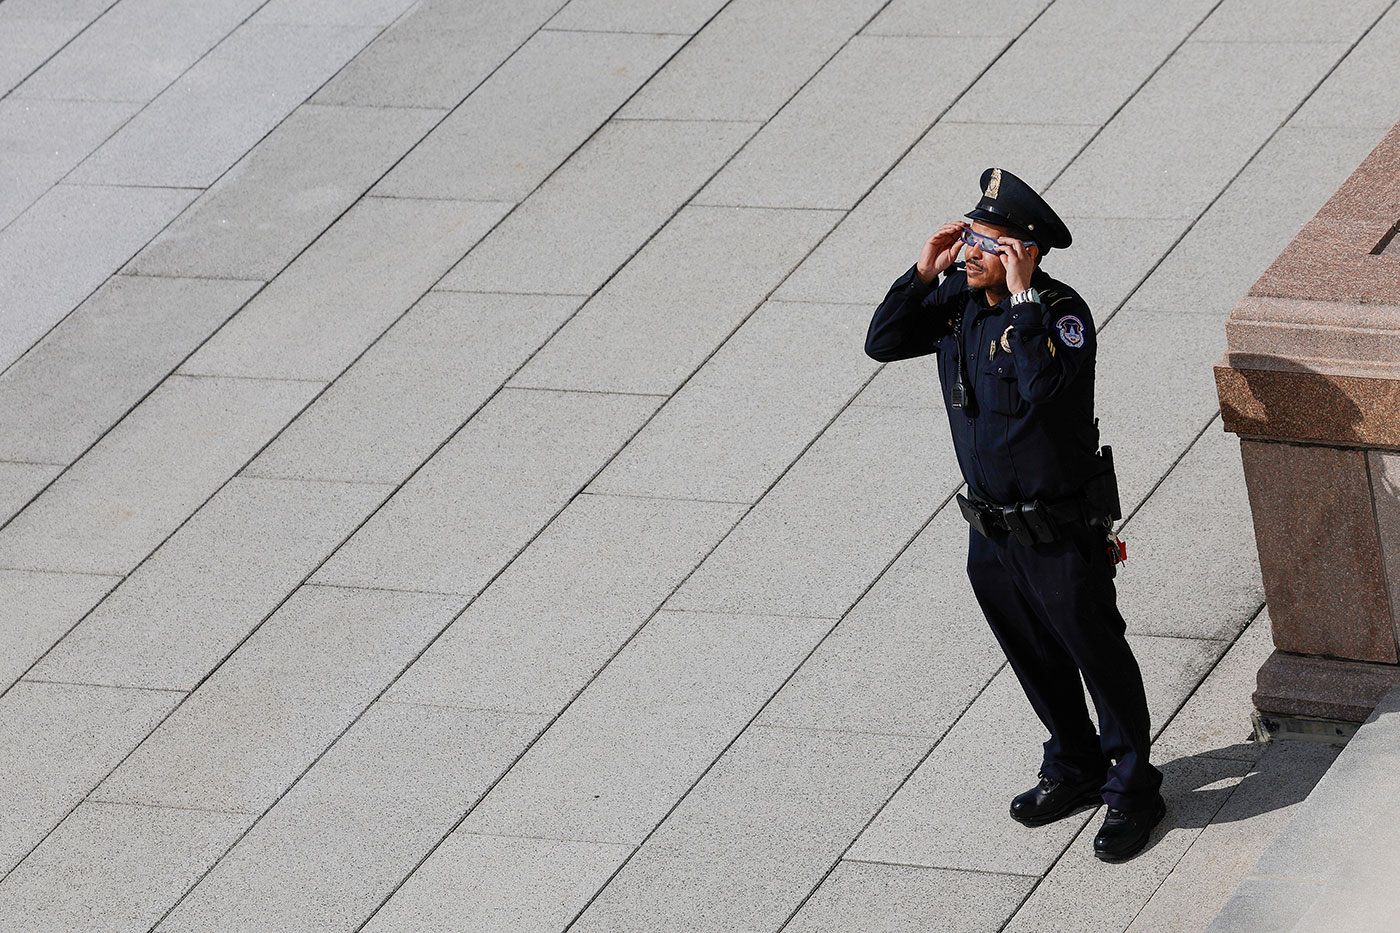 A US Capitol police officer uses eclipse viewing glasses to look up at the partial solar eclipse in Washington DC - 8 April 2024 (Anna Moneymaker/Getty Images)